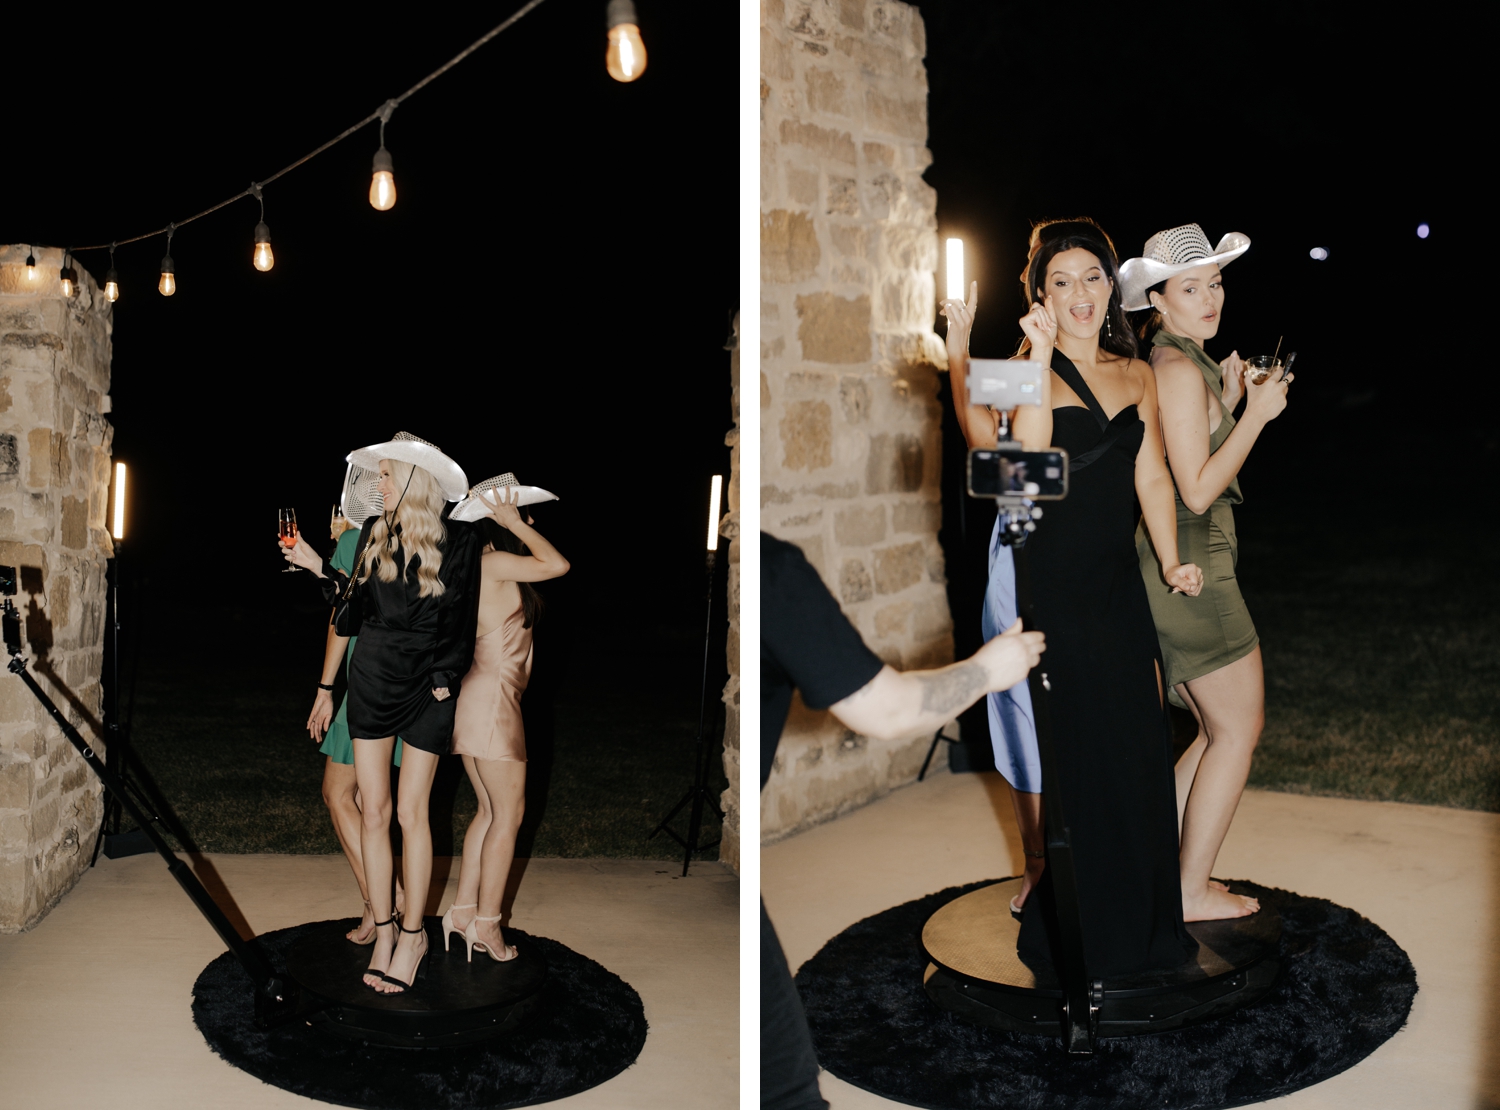 Viva 360 photo booth for Texas Hill Country wedding guests favors. | Texas Hill Country Fall Wedding | Central Texas Wedding Floral Designer